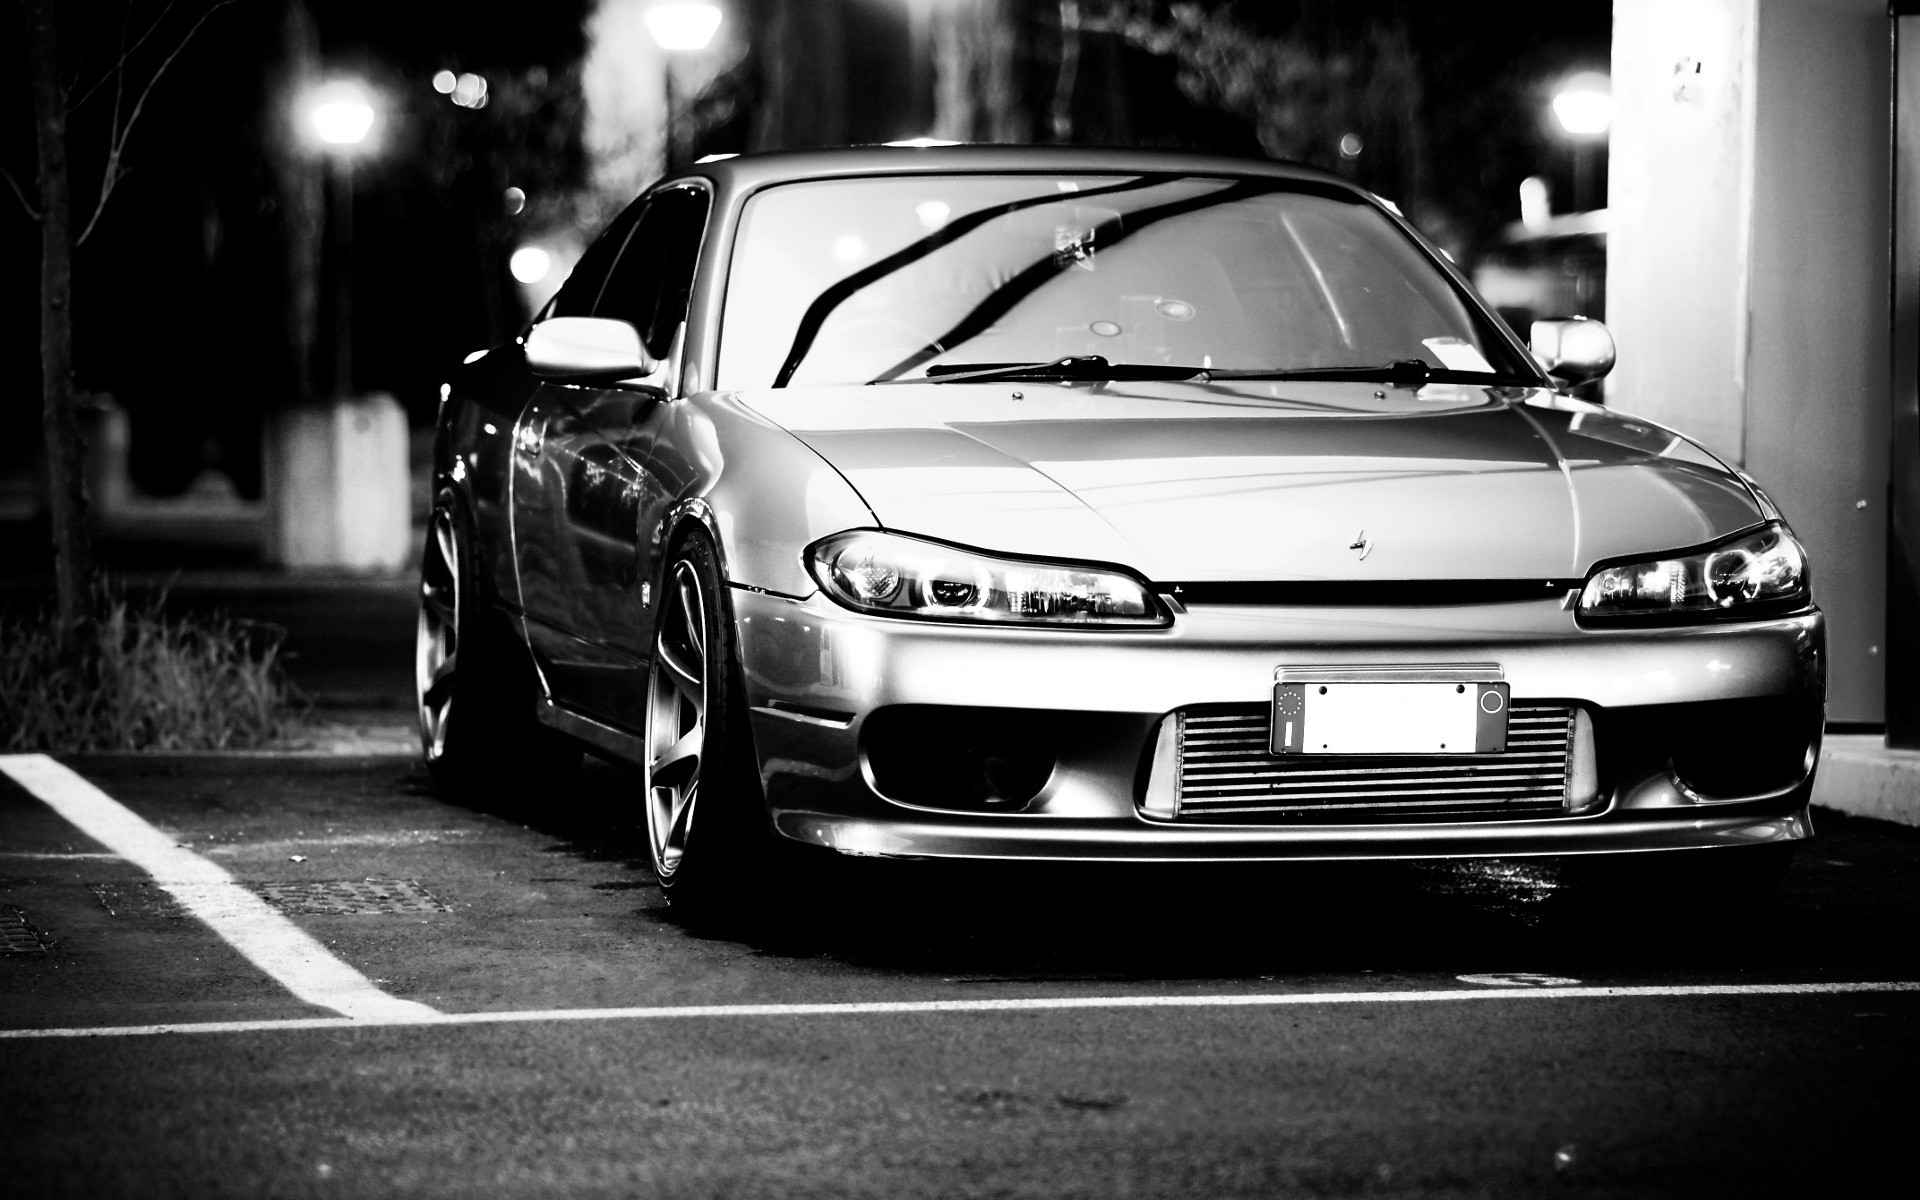 Free Download Cars Monochrome Nissan Silvia S15 Jdm Wallpaper 19x10 167 19x10 For Your Desktop Mobile Tablet Explore 48 Jdm Iphone Wallpaper Jdm Wallpaper Nokia Free Wallpapers And Screensavers